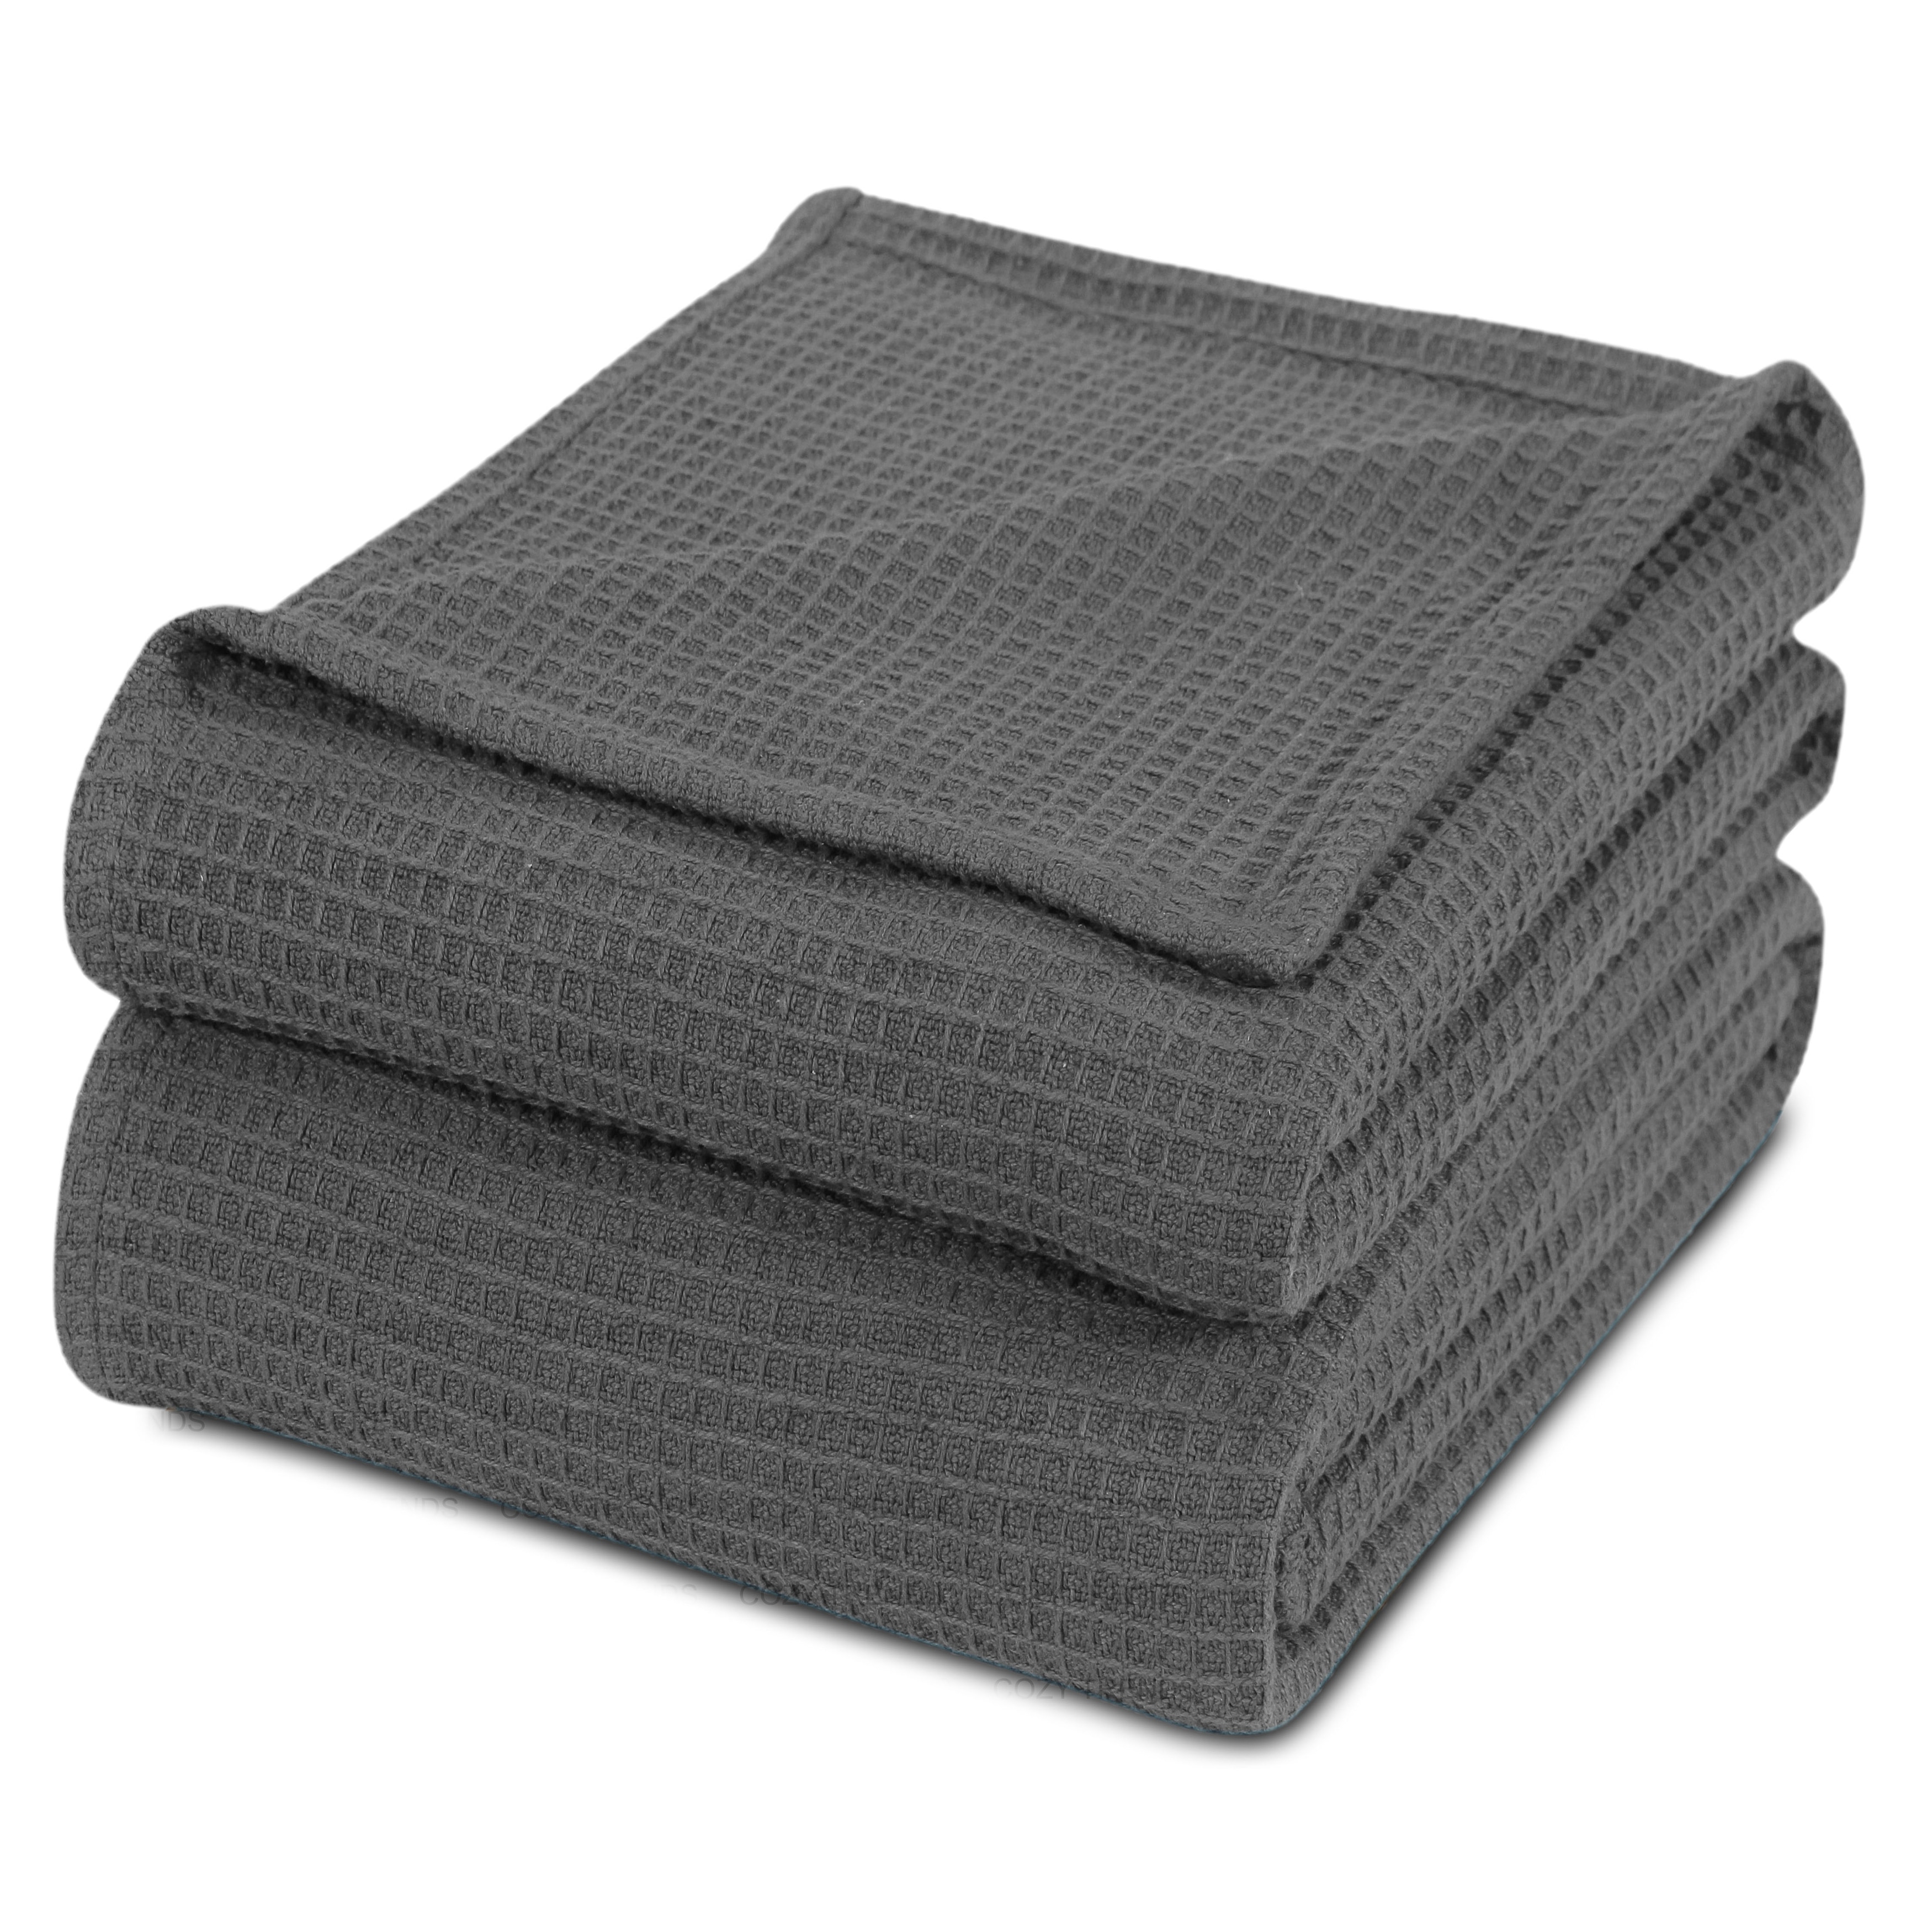 https://ak1.ostkcdn.com/images/products/is/images/direct/22ac2636c0ab3703bca55917dd69bc7e22cca3dc/100%25-Soft-Cozy-Combed-Cotton-Thermal-Blankets-All-Season-Light-Weight.jpg